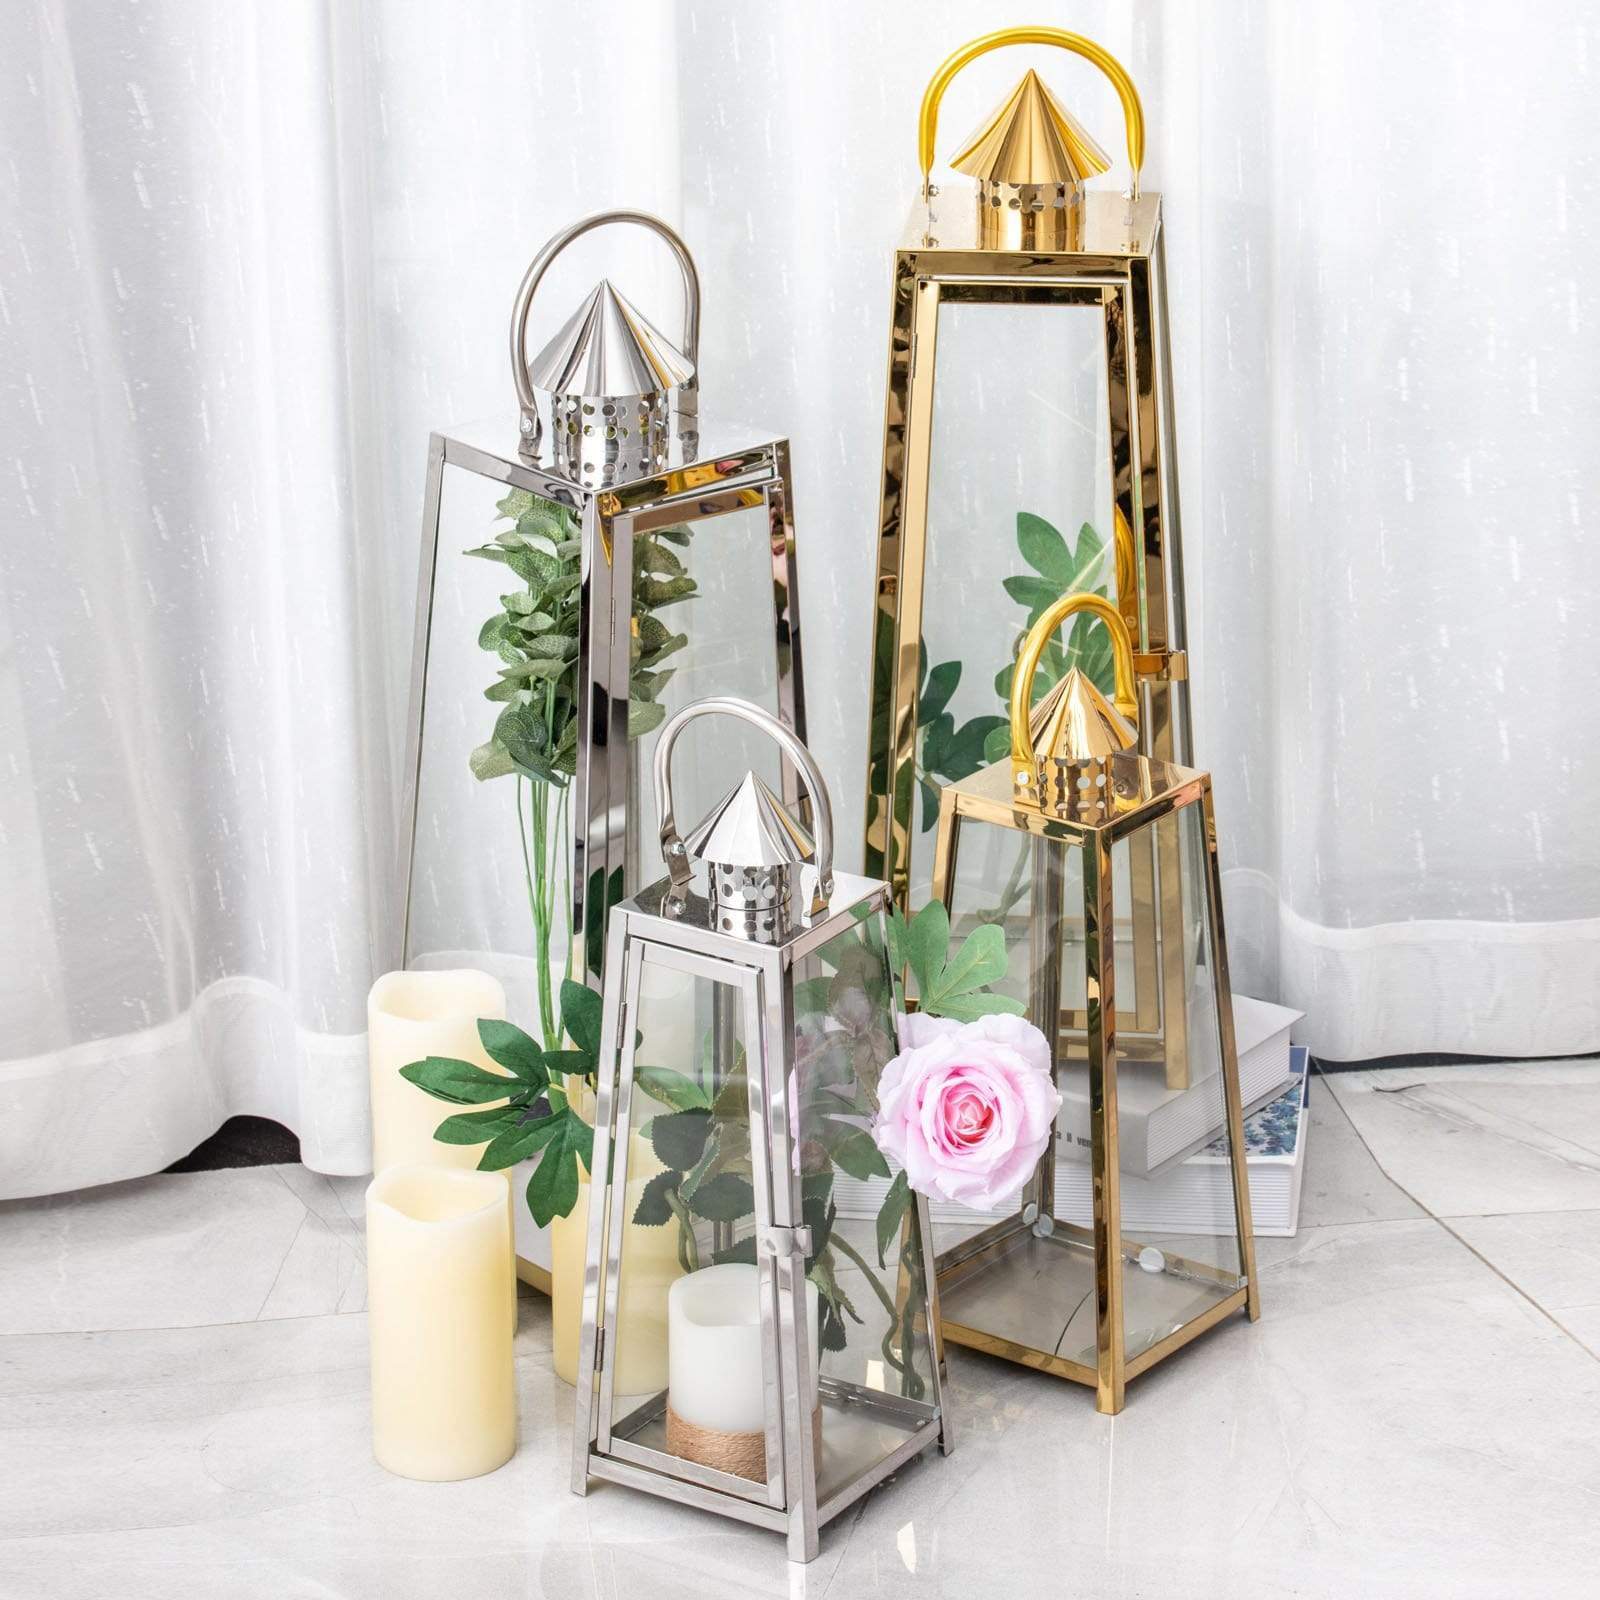 15 in tall Metal Lantern Candle Holder Centerpiece